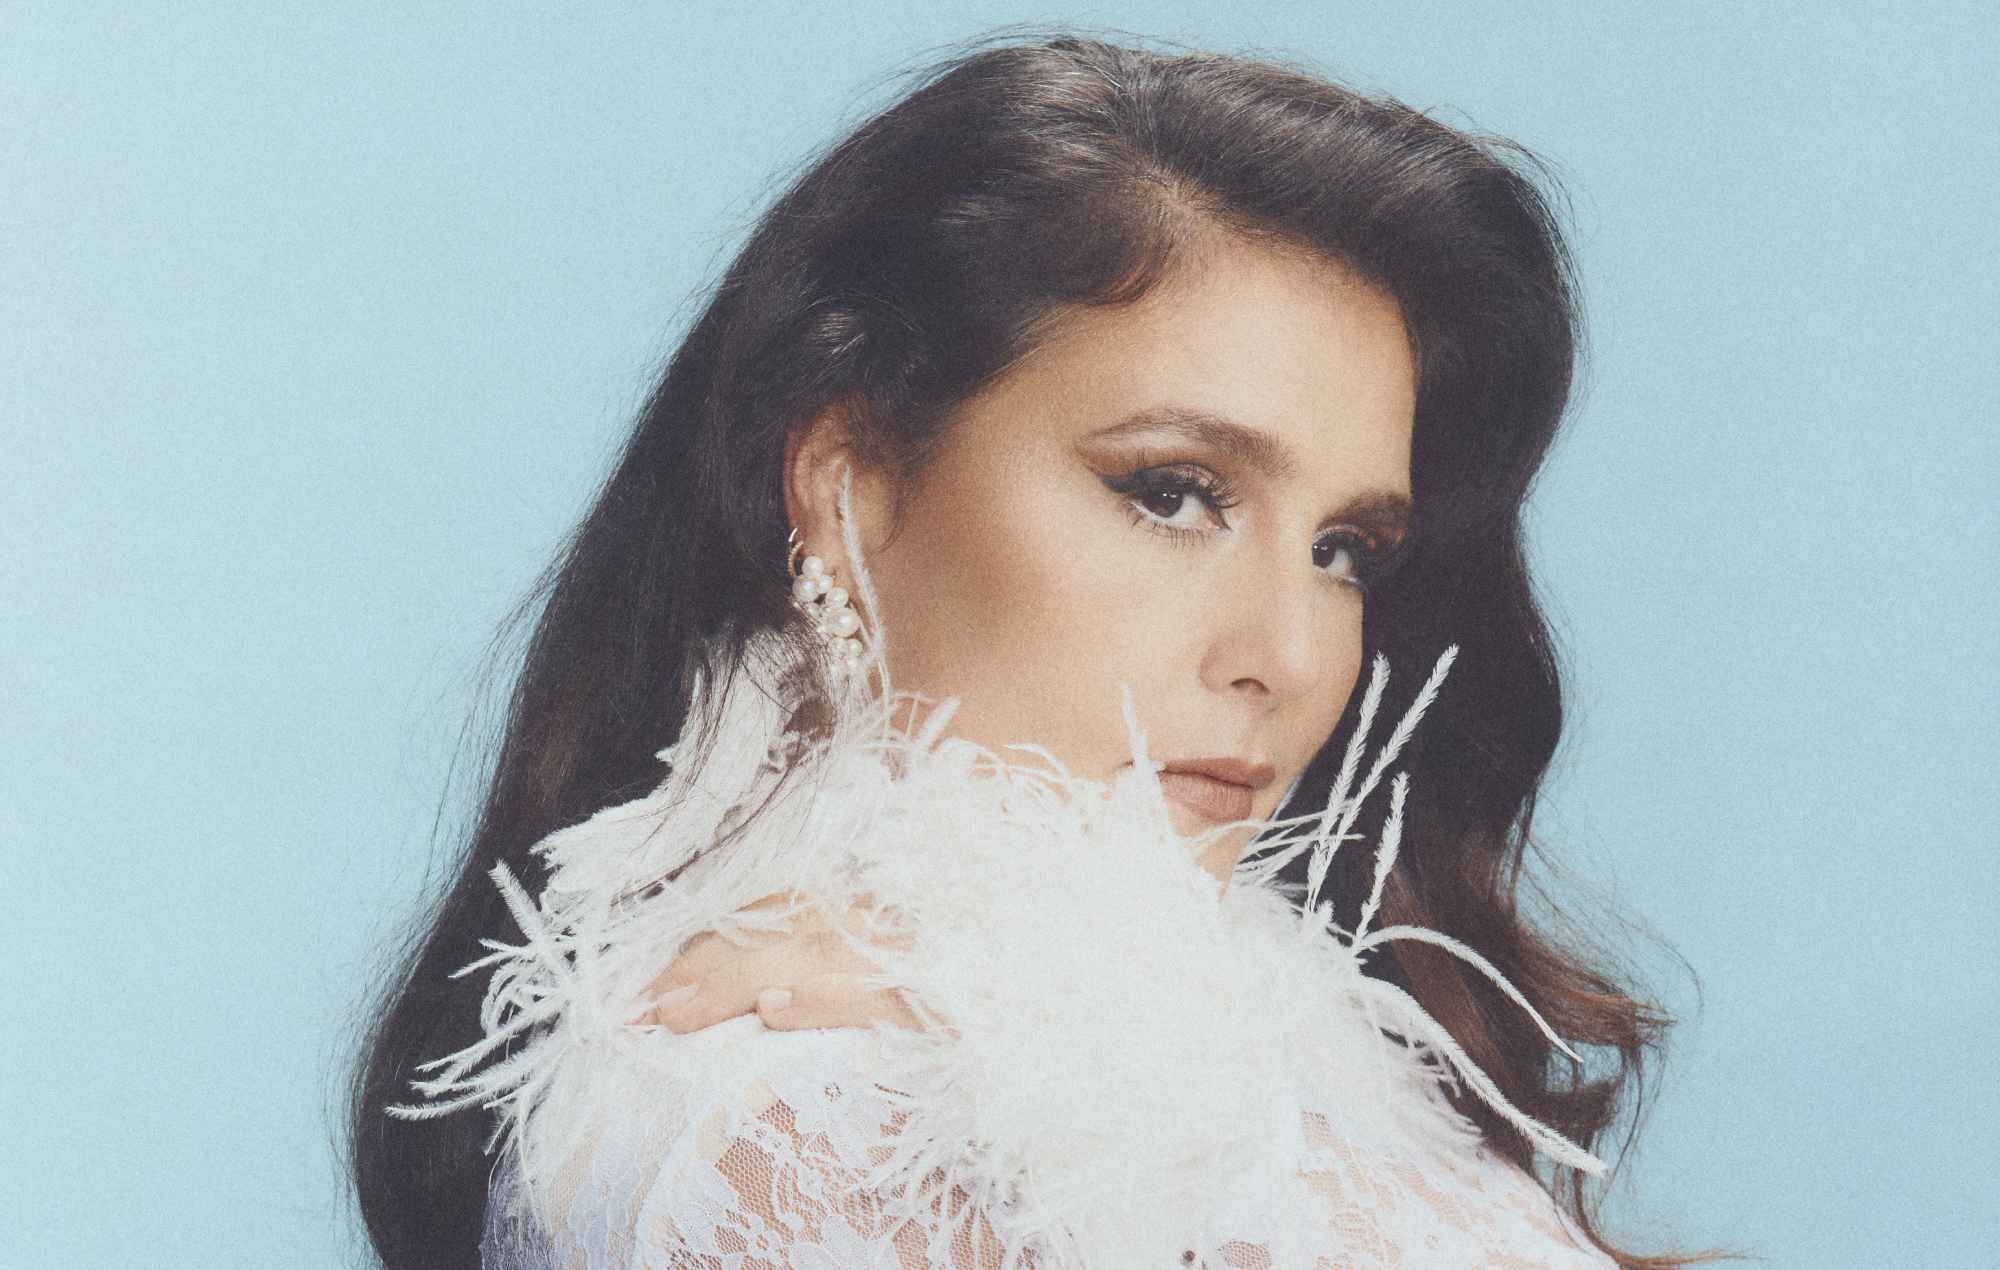 Jessie Ware announces fifth album ‘That! Feels Good!’, shares new song ‘Pearls’